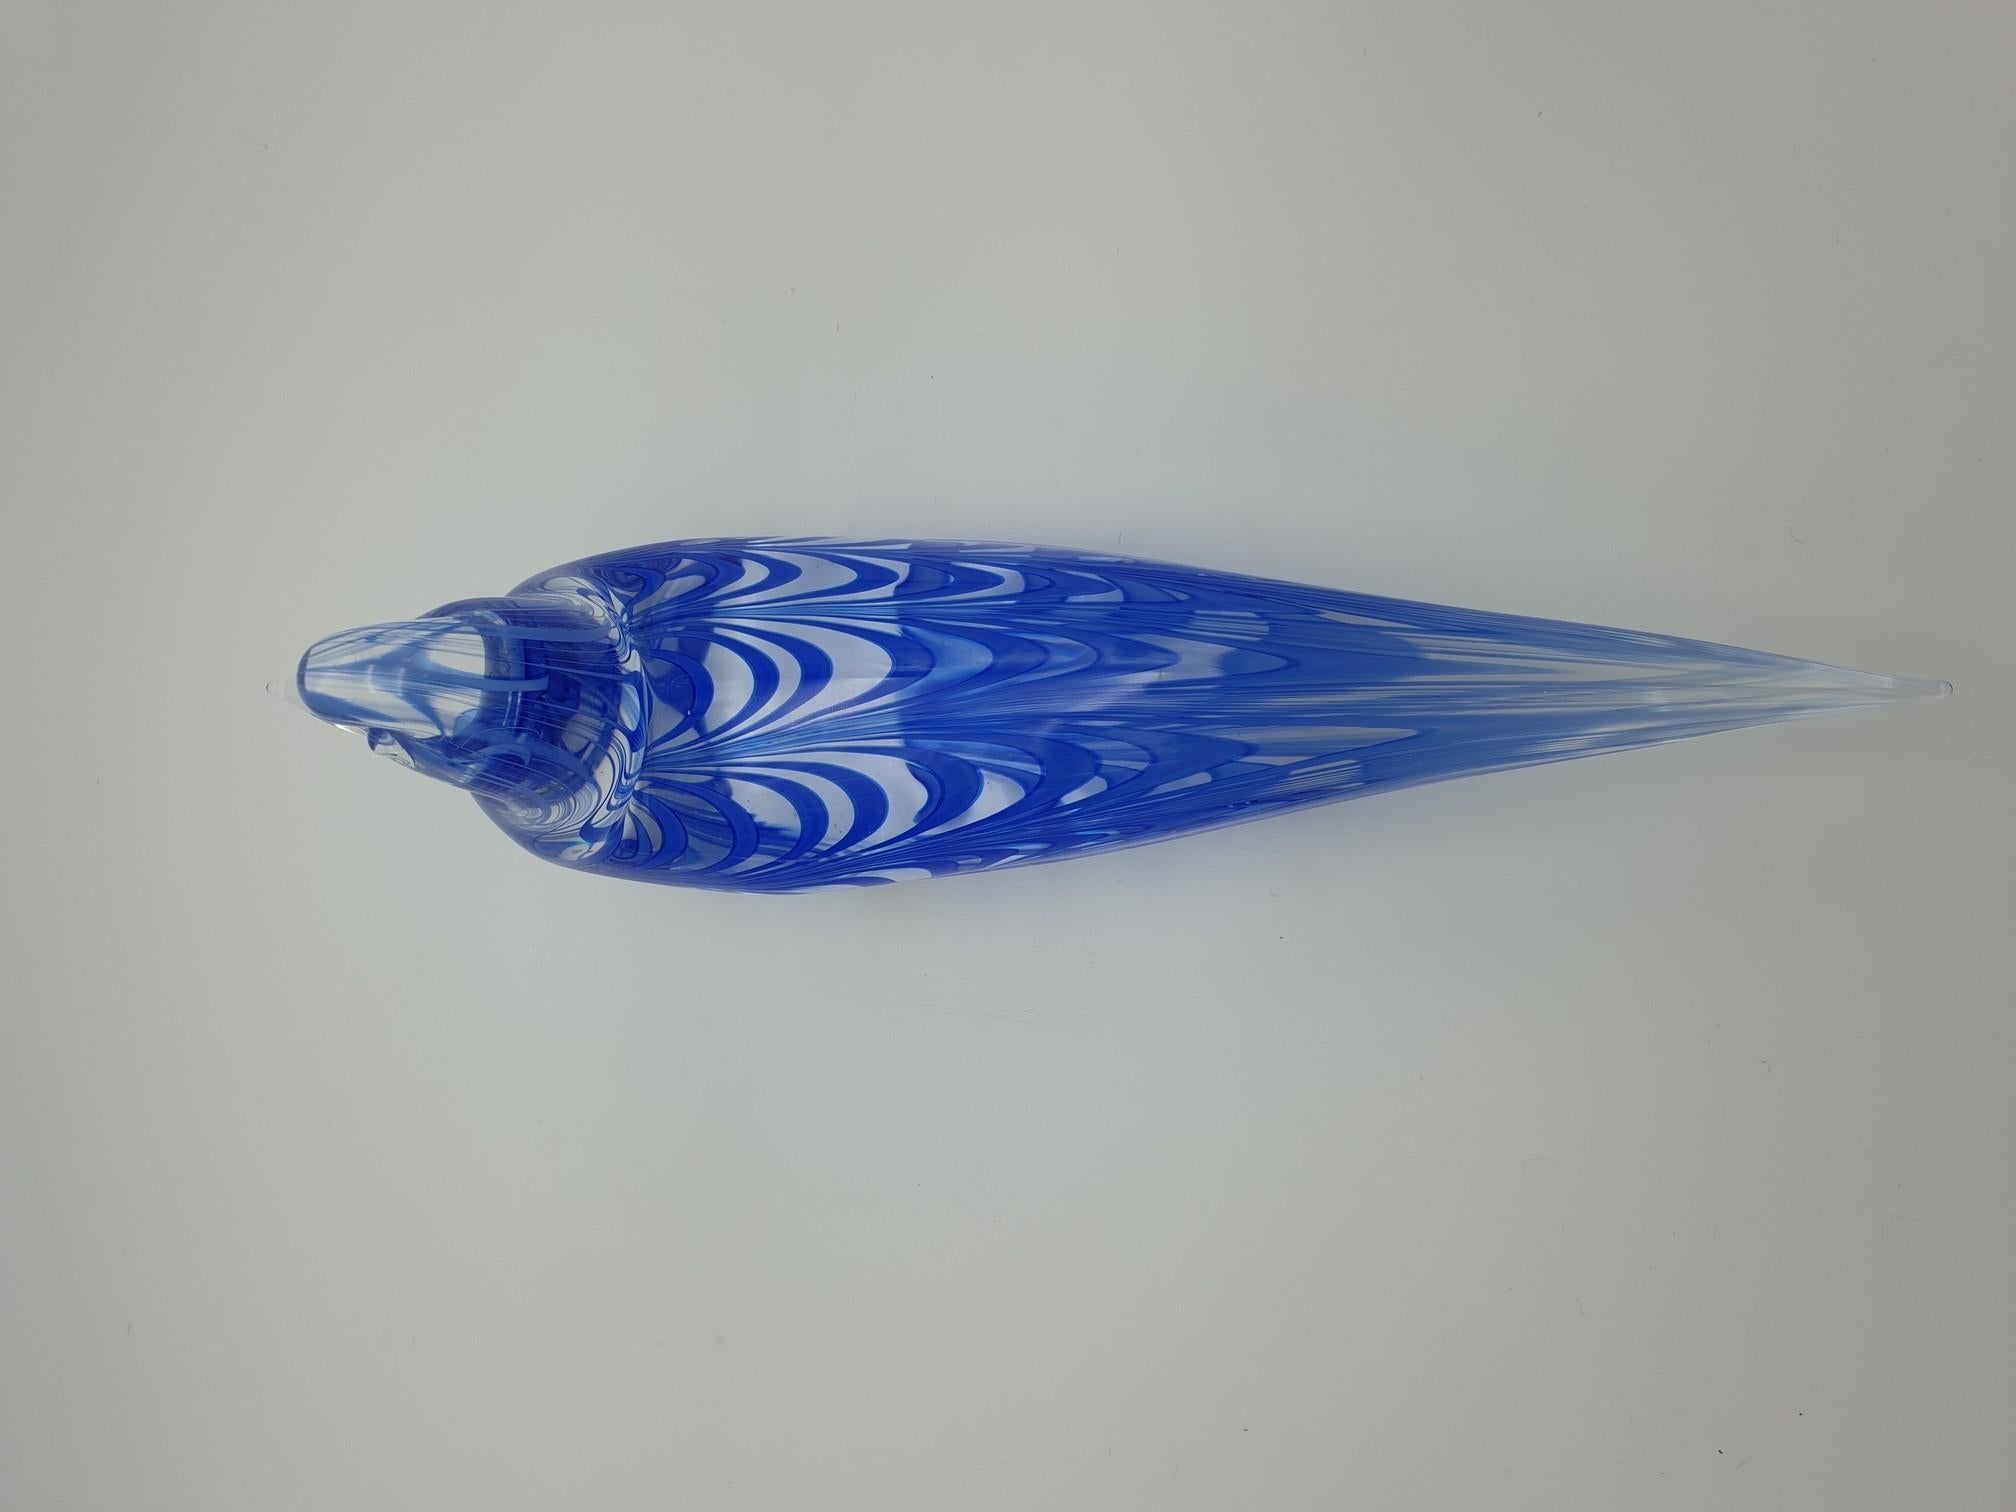 Hand-Crafted Modern Murano Glass Bird in Blue Fenicio Festooning Pattern by Cenedese, 1970s For Sale